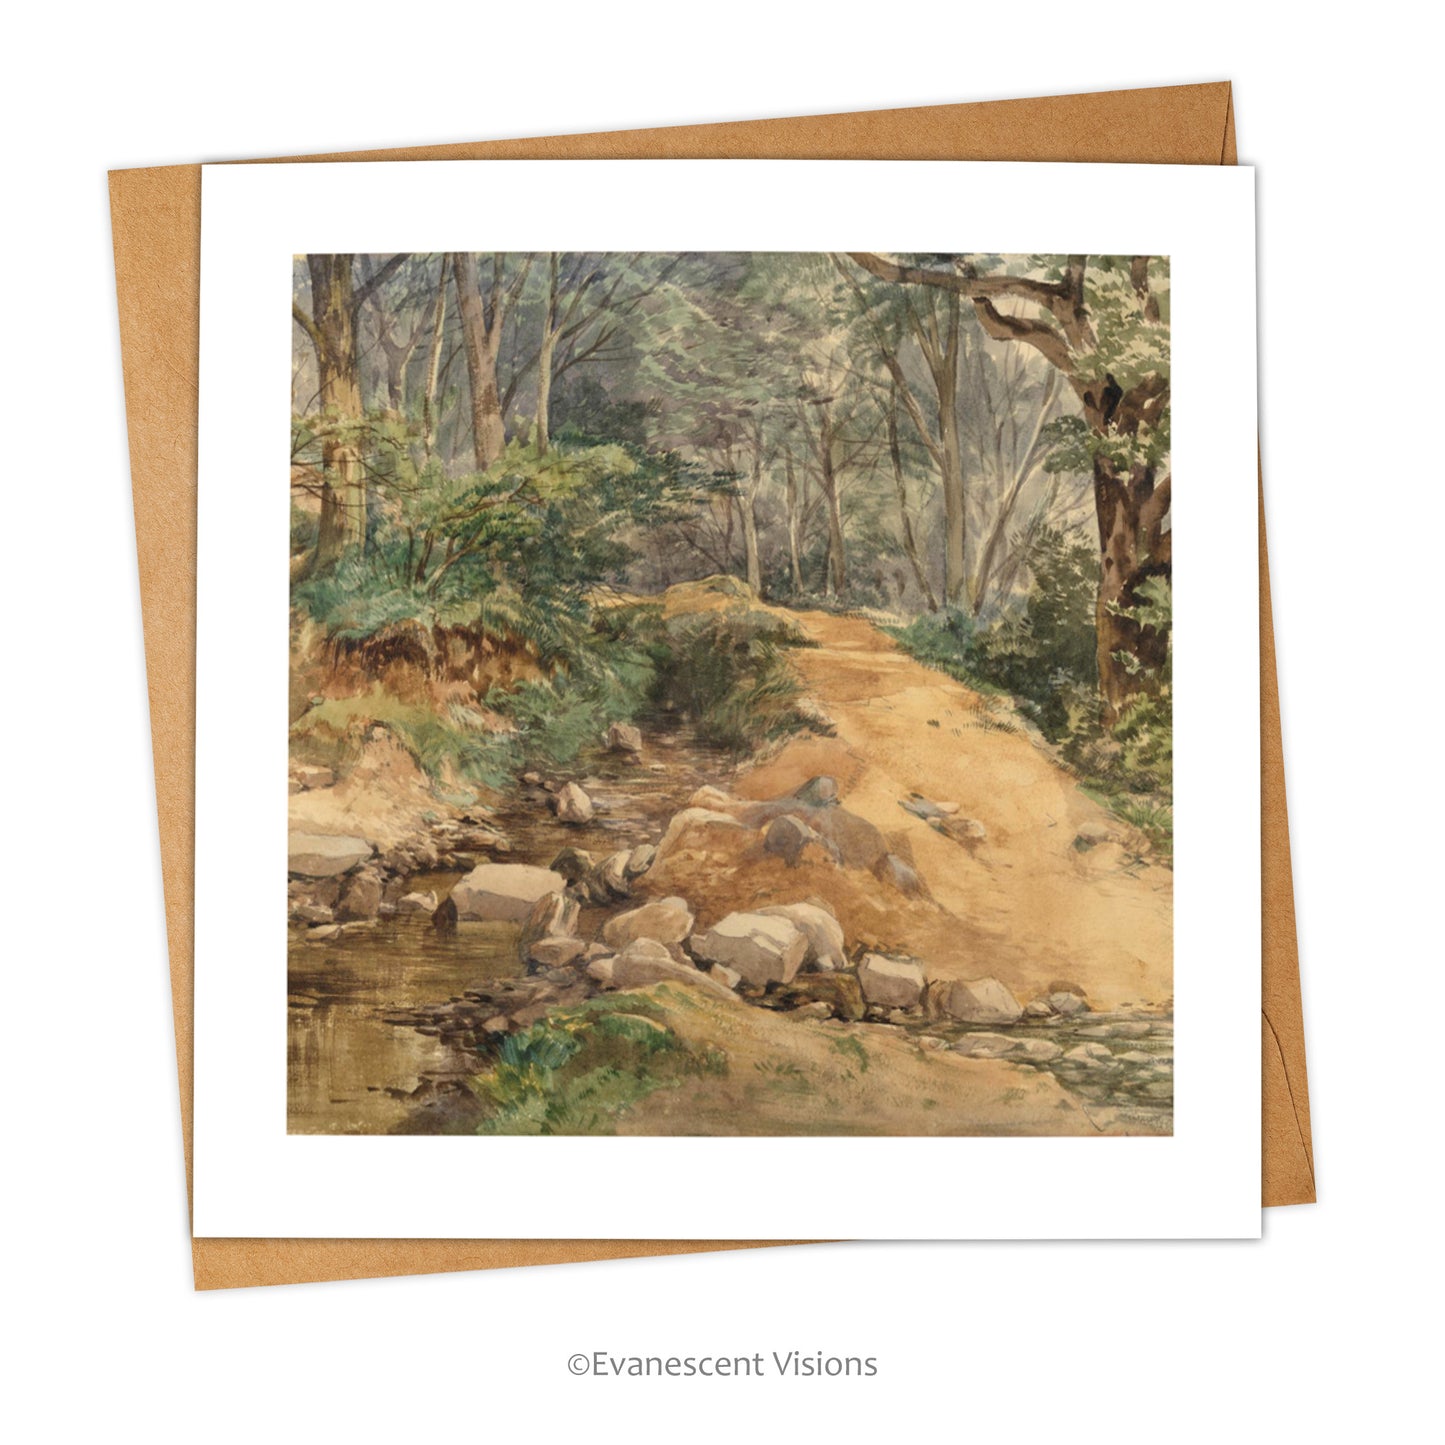 Card and envelope. Card has design 'Woodland Scene with a Path across a Stream' by John Middleton.